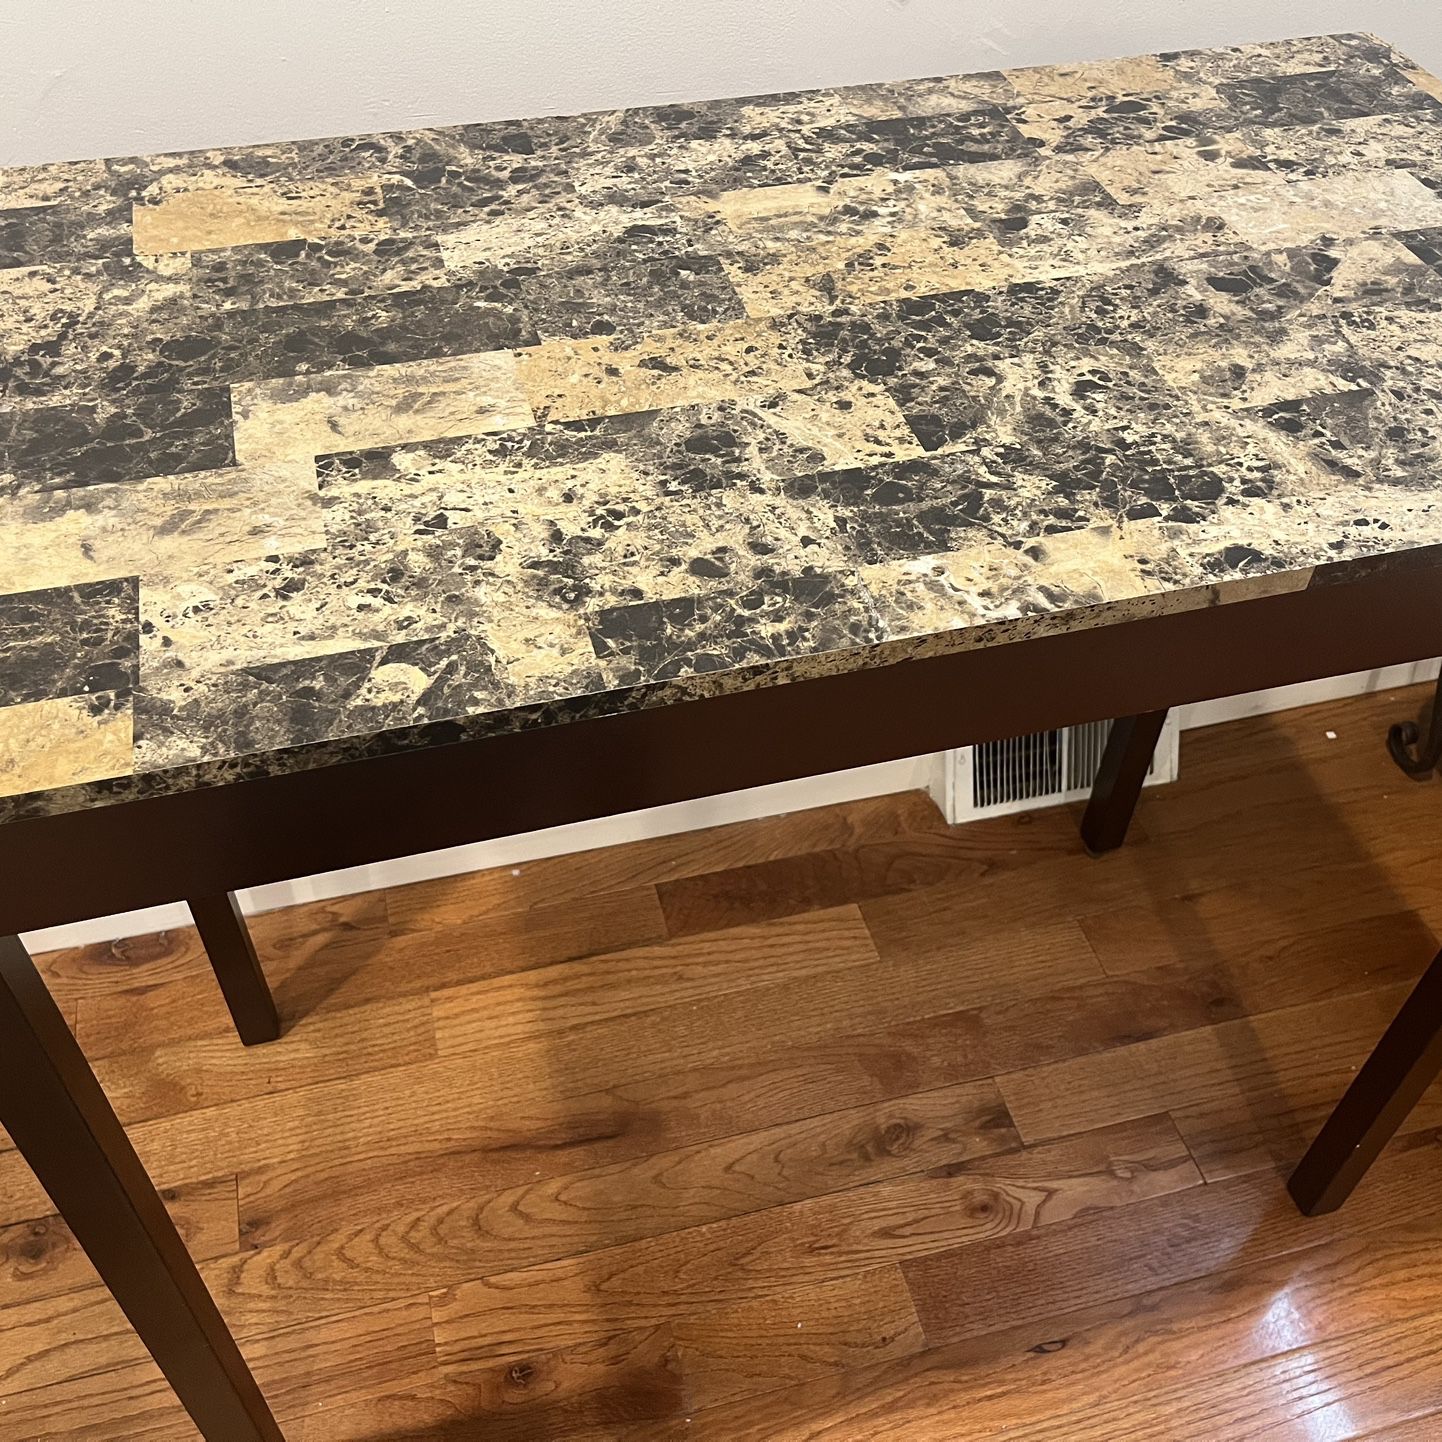  Table Top For Sale 